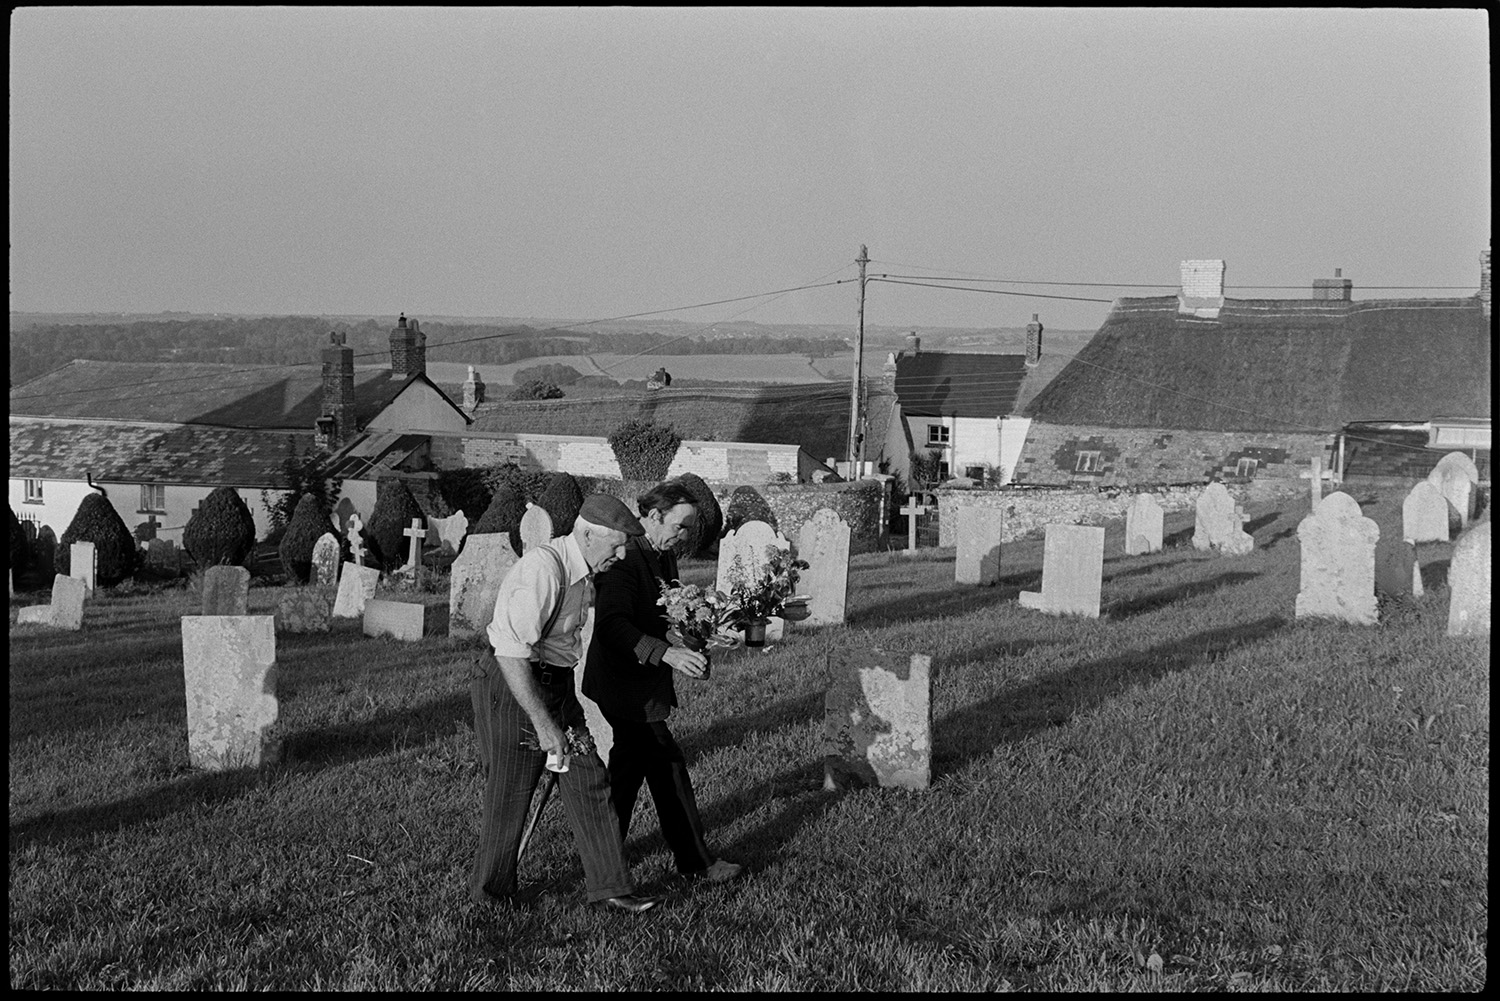 Men working in graveyard, carrying flowers, clipping hedge.
[Two men walking through Petrockstowe churchyard carrying floral displays. Gravestones and clipped bushes are visible in the graveyard and house roofs can be seen in the background.]